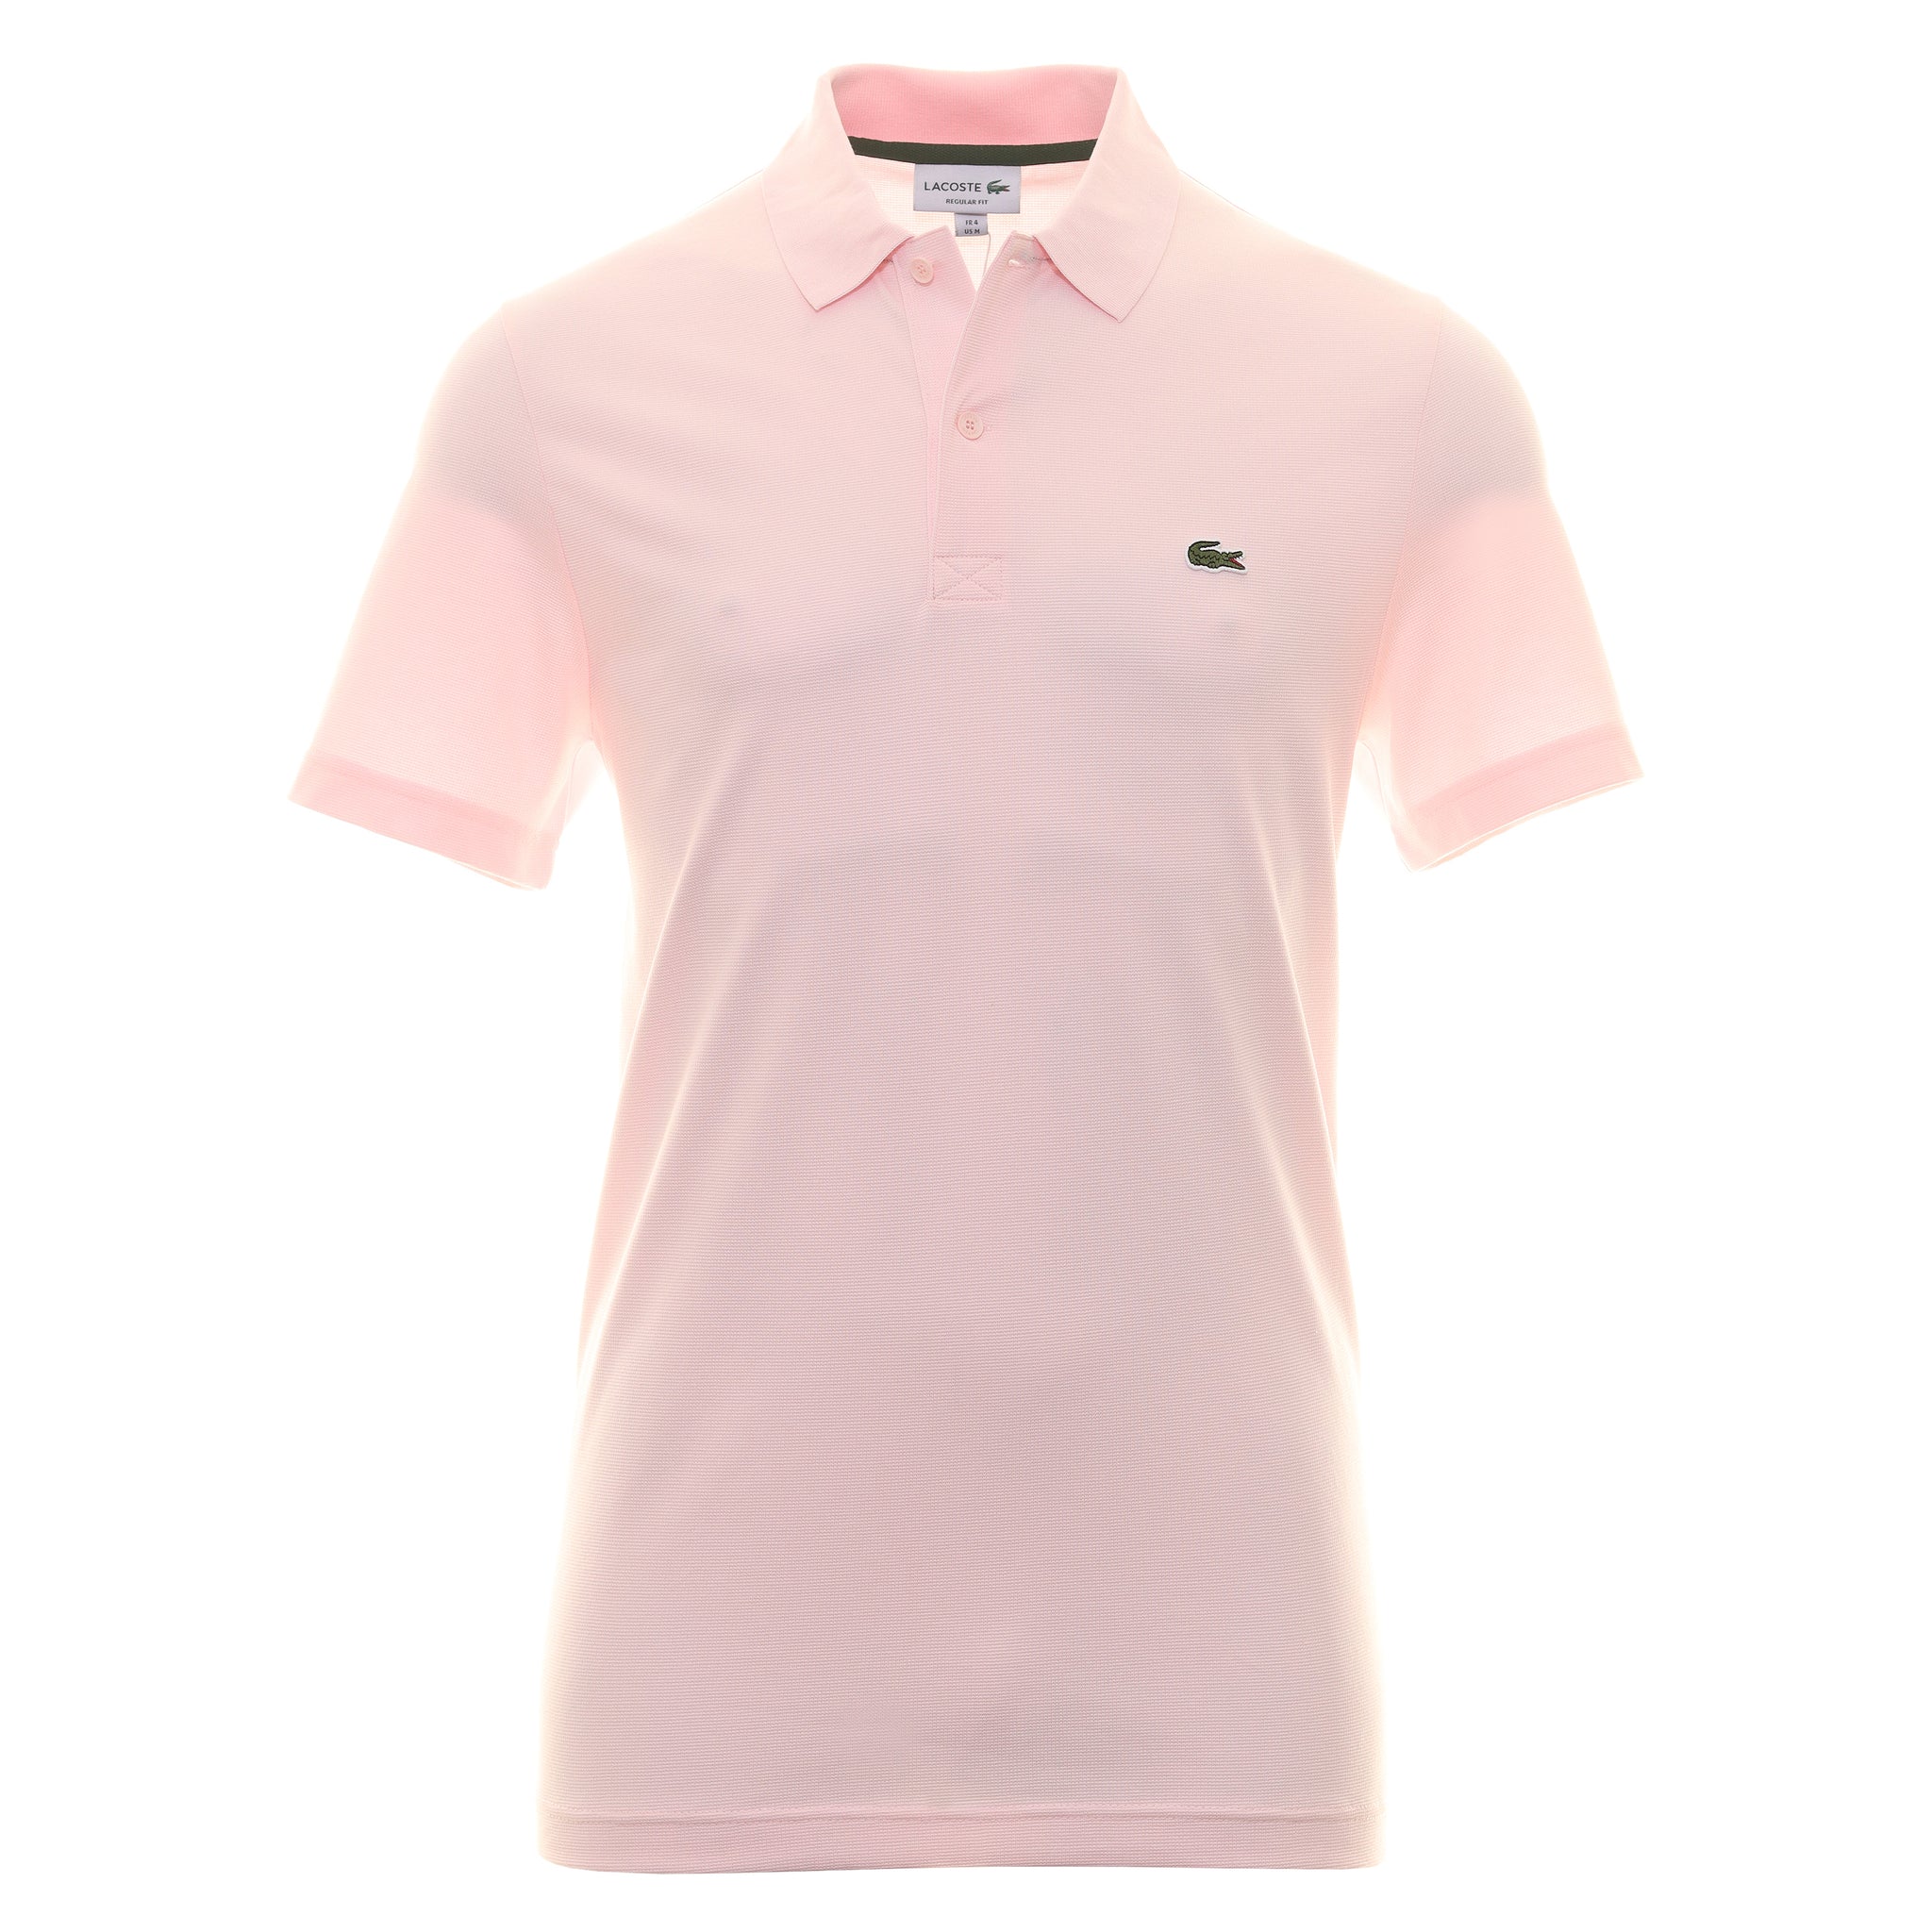 Lacoste Organic Cotton Stretch Polo Shirt DH0783 Flamingo T03 | Function18